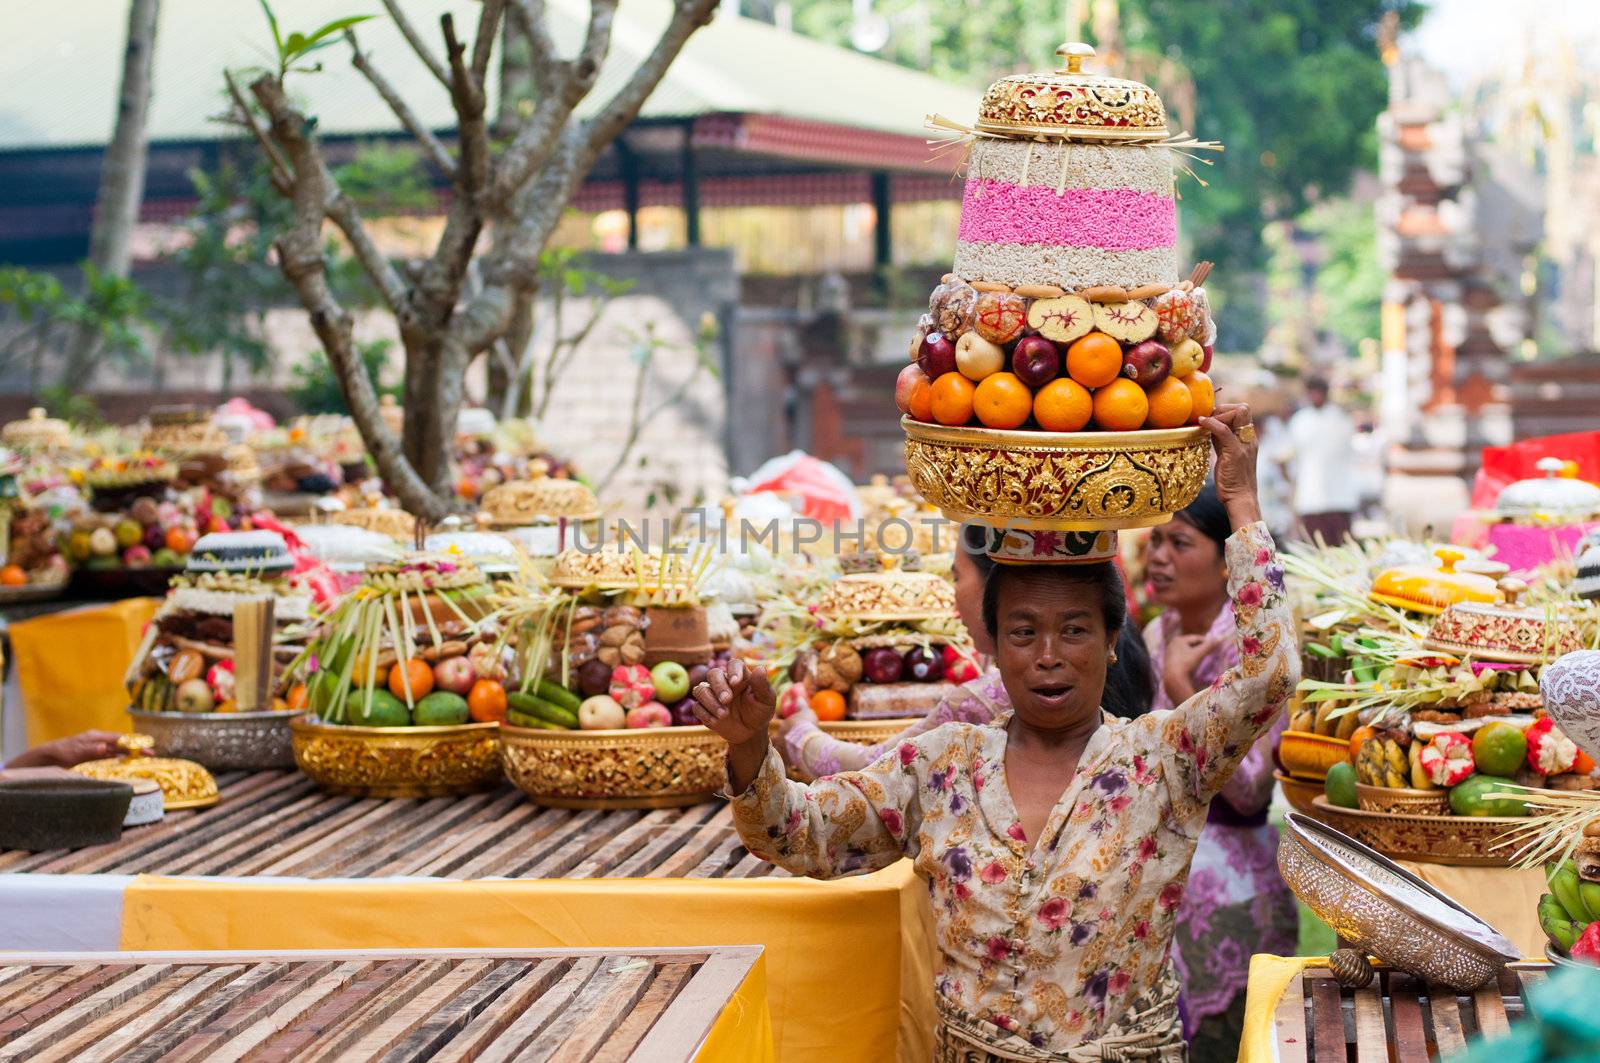 Tirta Empul, Bali, Indonesia - October 11, 2011: woman with basket on here head walking to Tirta Empul Temple to give offerings to the spirits